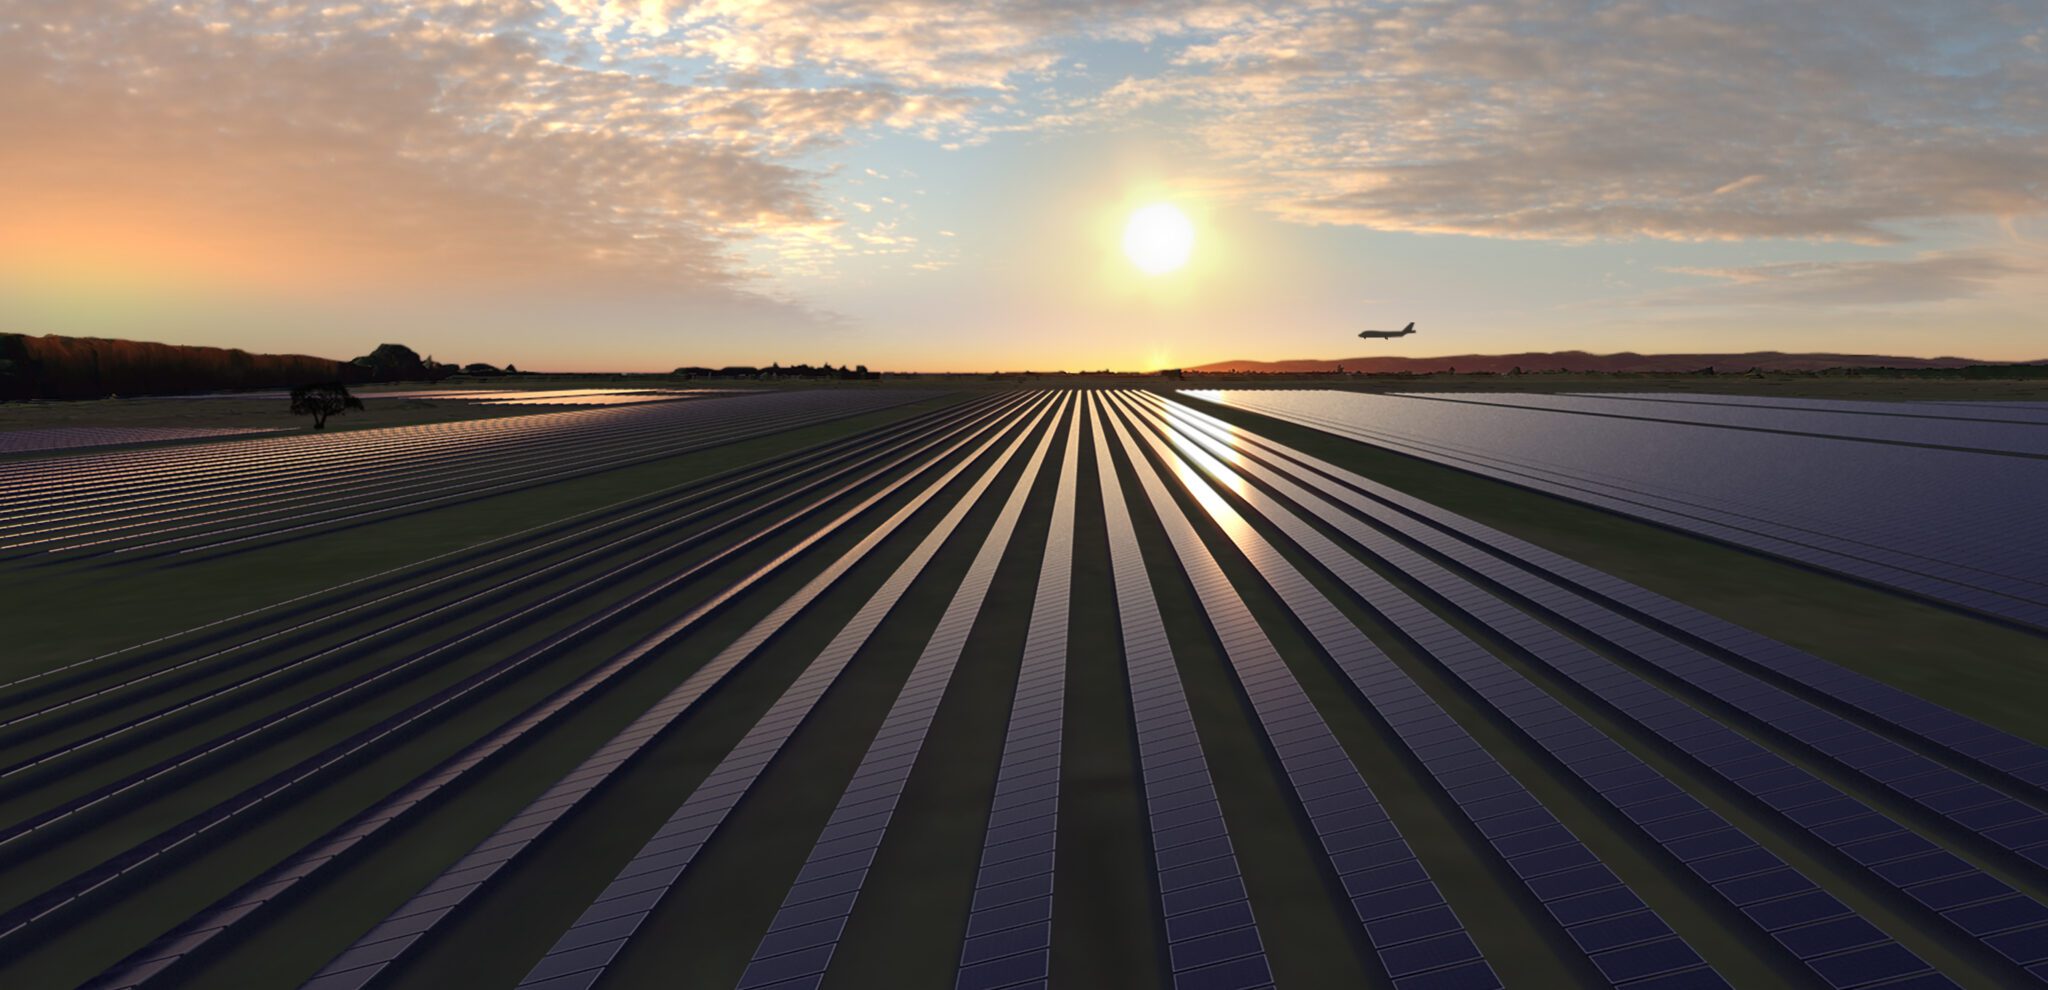 Solar is creating the fastest energy change in history
